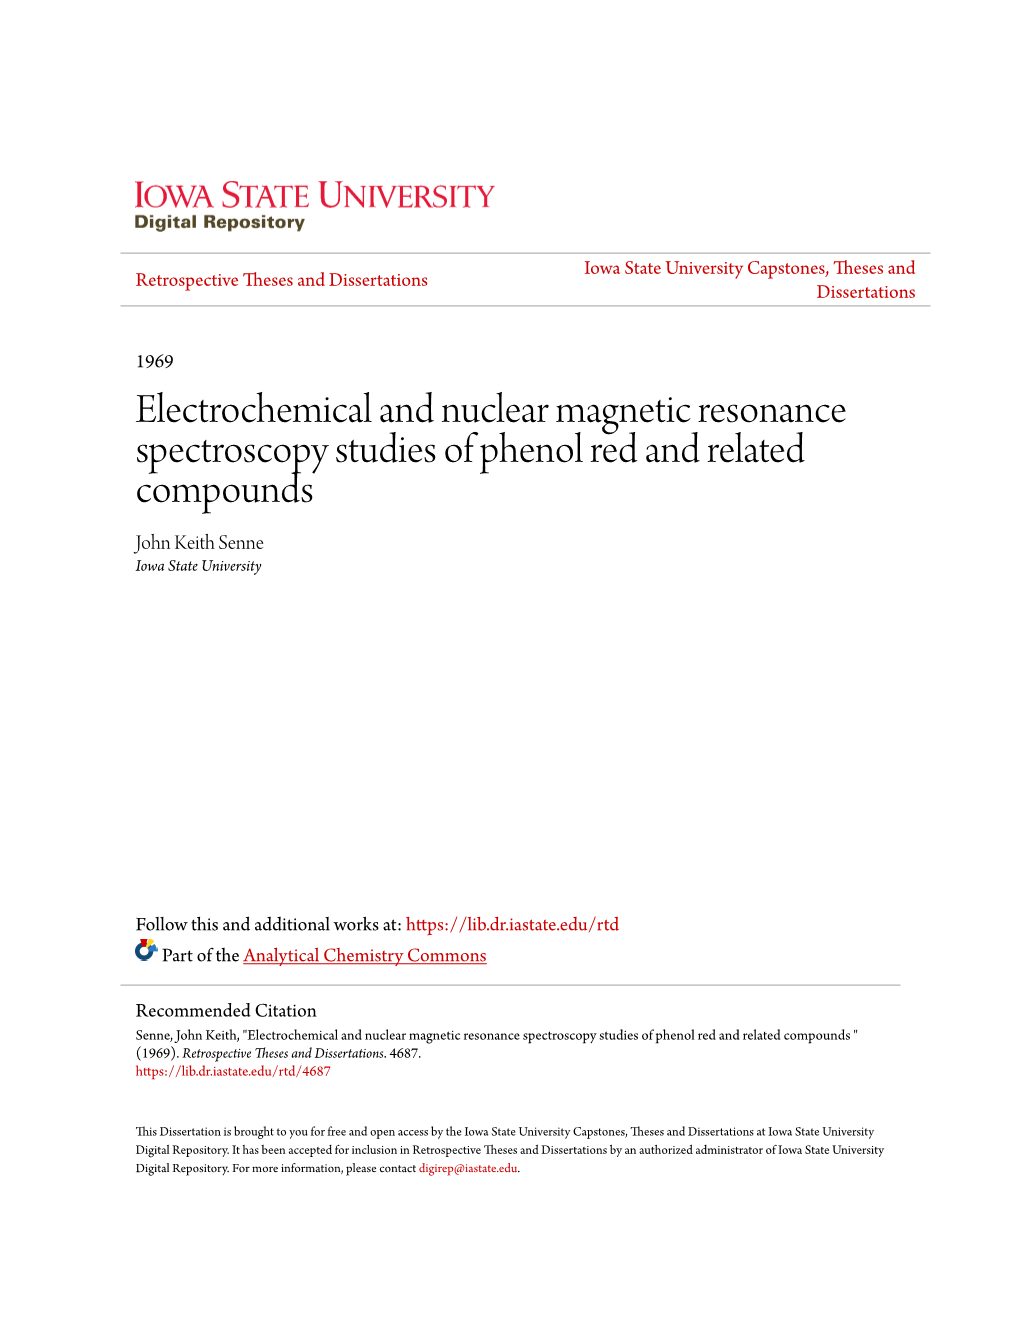 Electrochemical and Nuclear Magnetic Resonance Spectroscopy Studies of Phenol Red and Related Compounds John Keith Senne Iowa State University